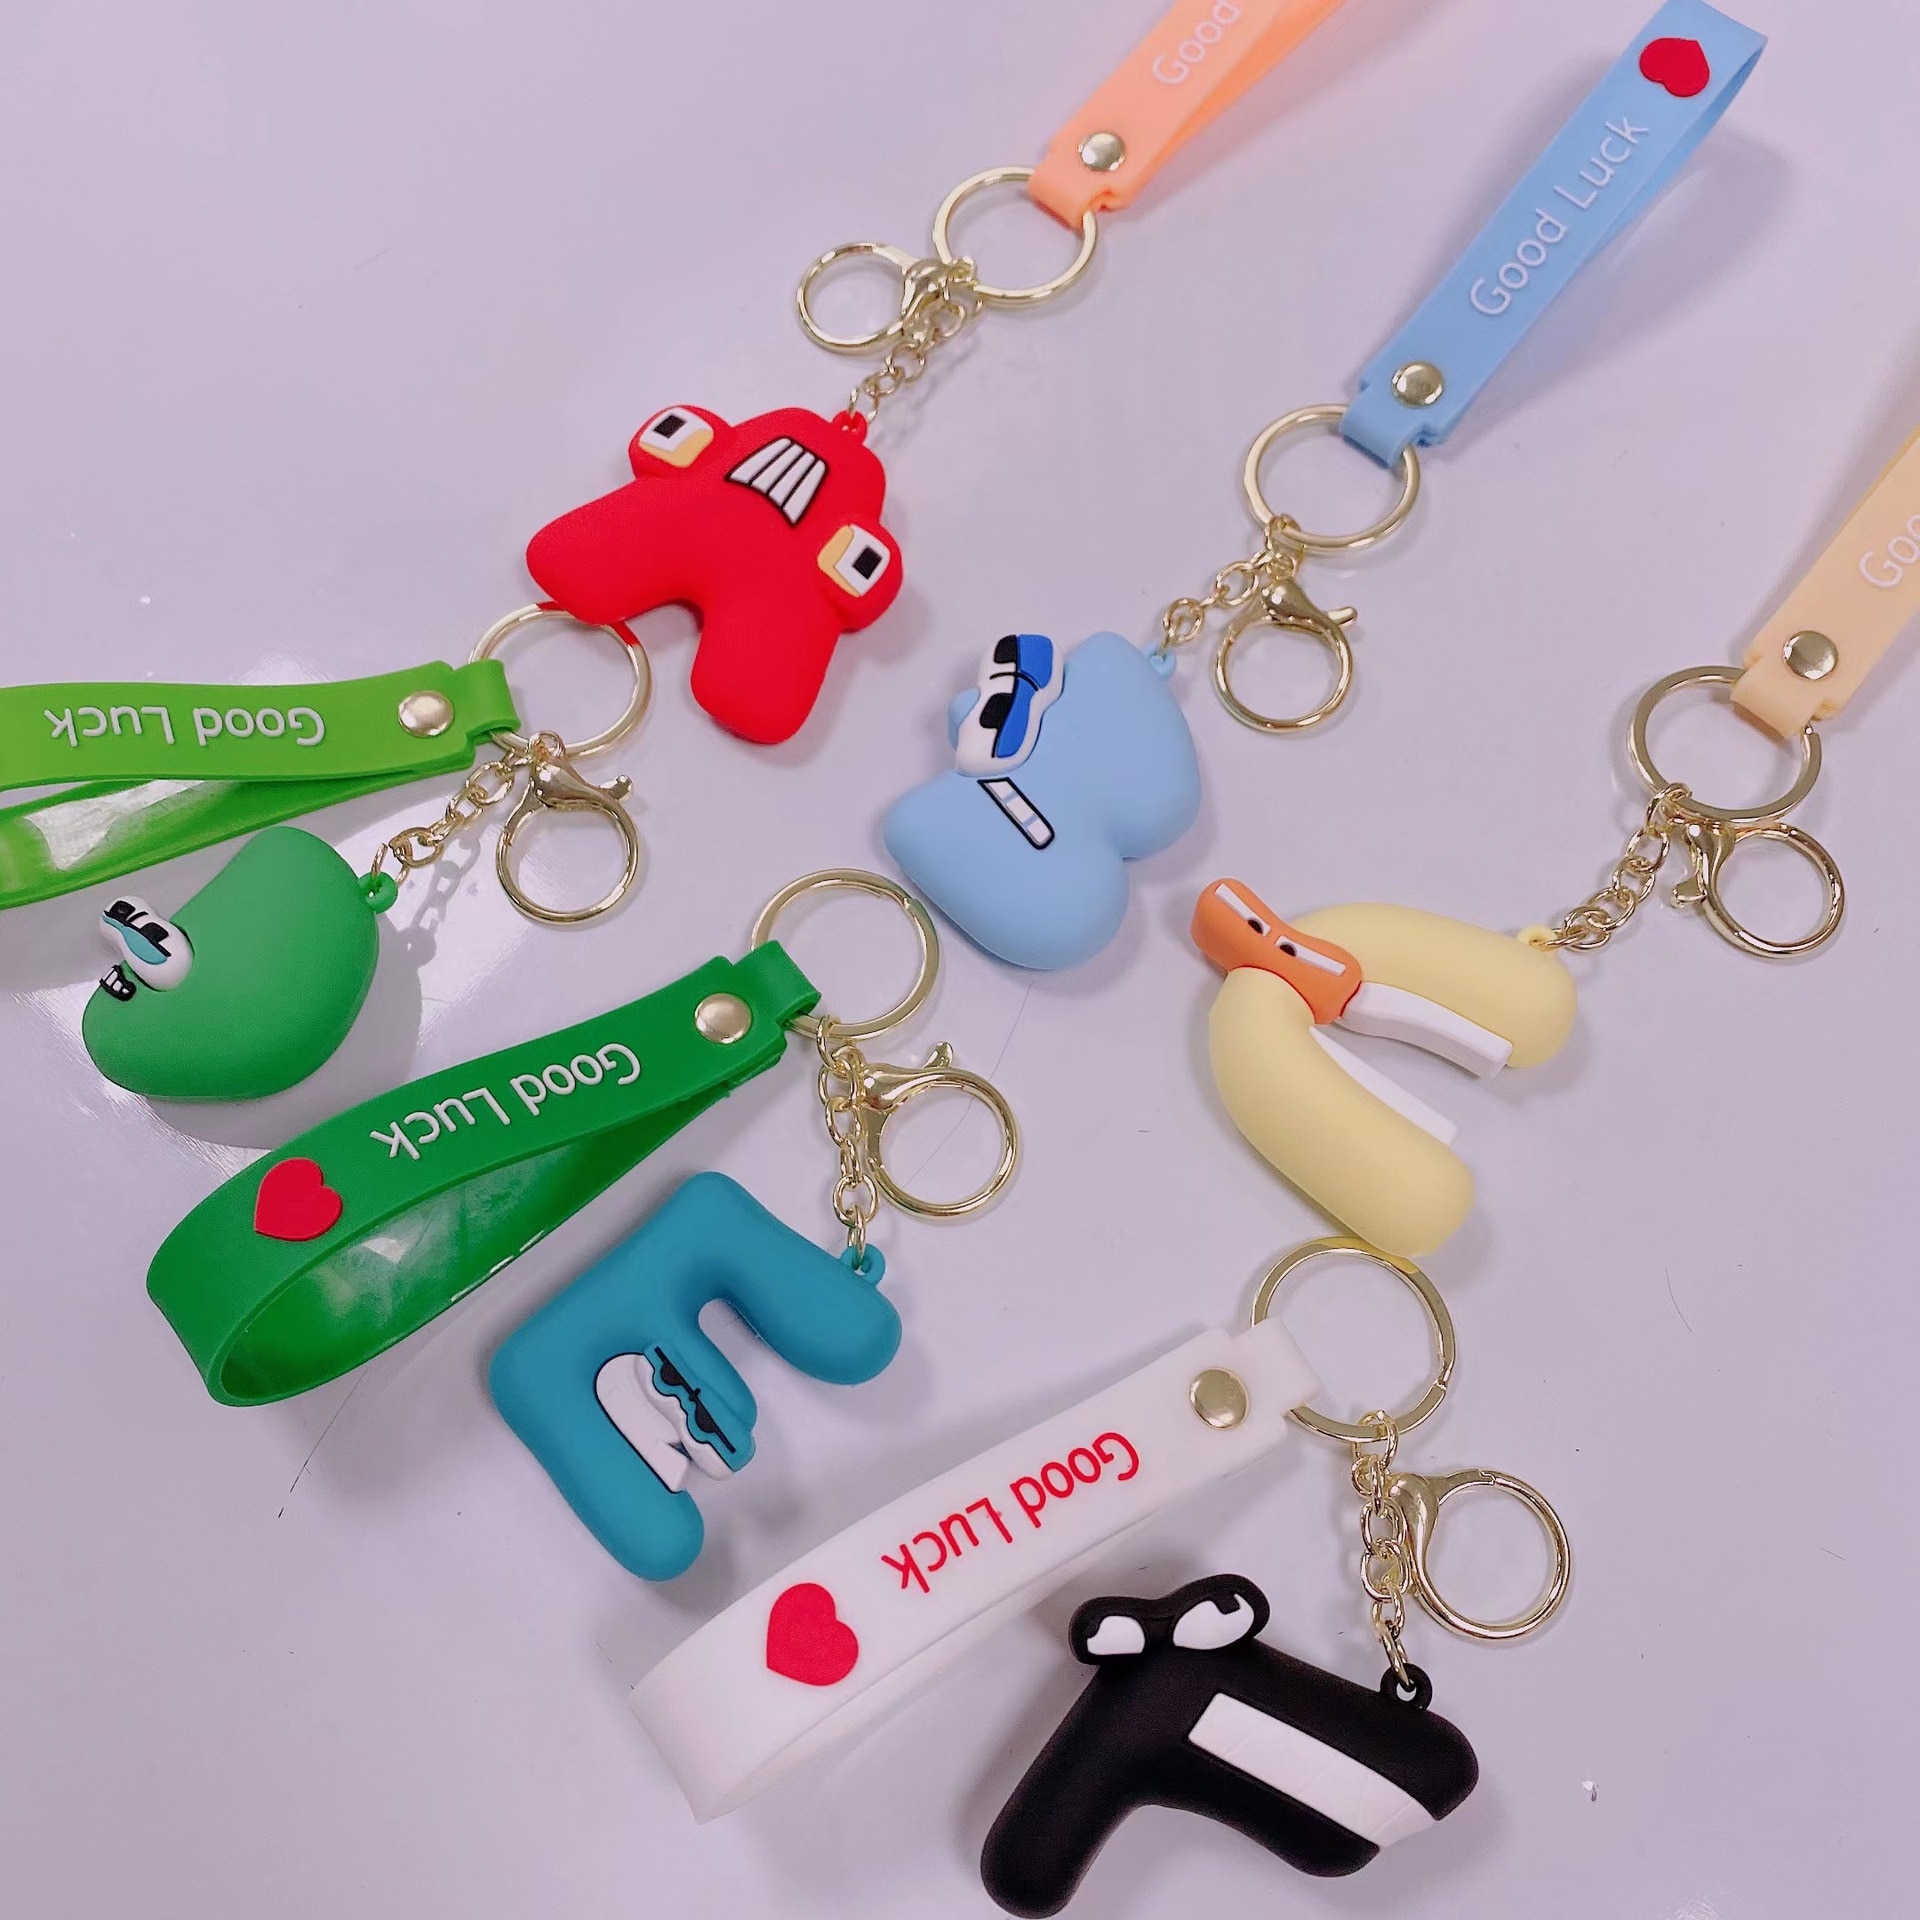 Alphabet Lore Keychain Toys English Letter Animal Doll Toys Gift for Kids Children Educational Alphabet Lore 2 - Alphabet Lore Plush